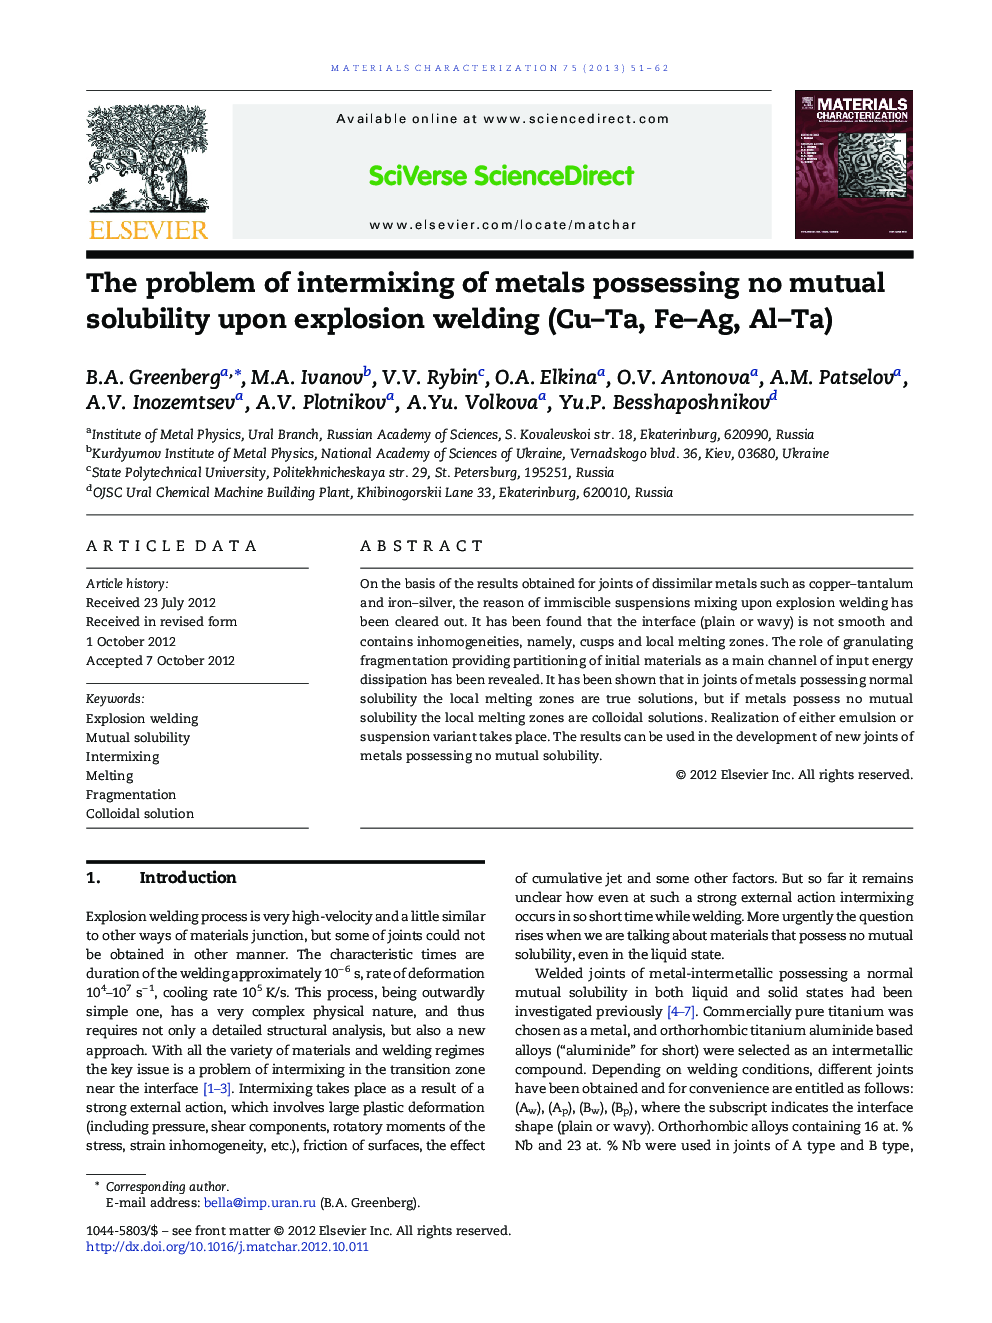 The problem of intermixing of metals possessing no mutual solubility upon explosion welding (Cu–Ta, Fe–Ag, Al–Ta)